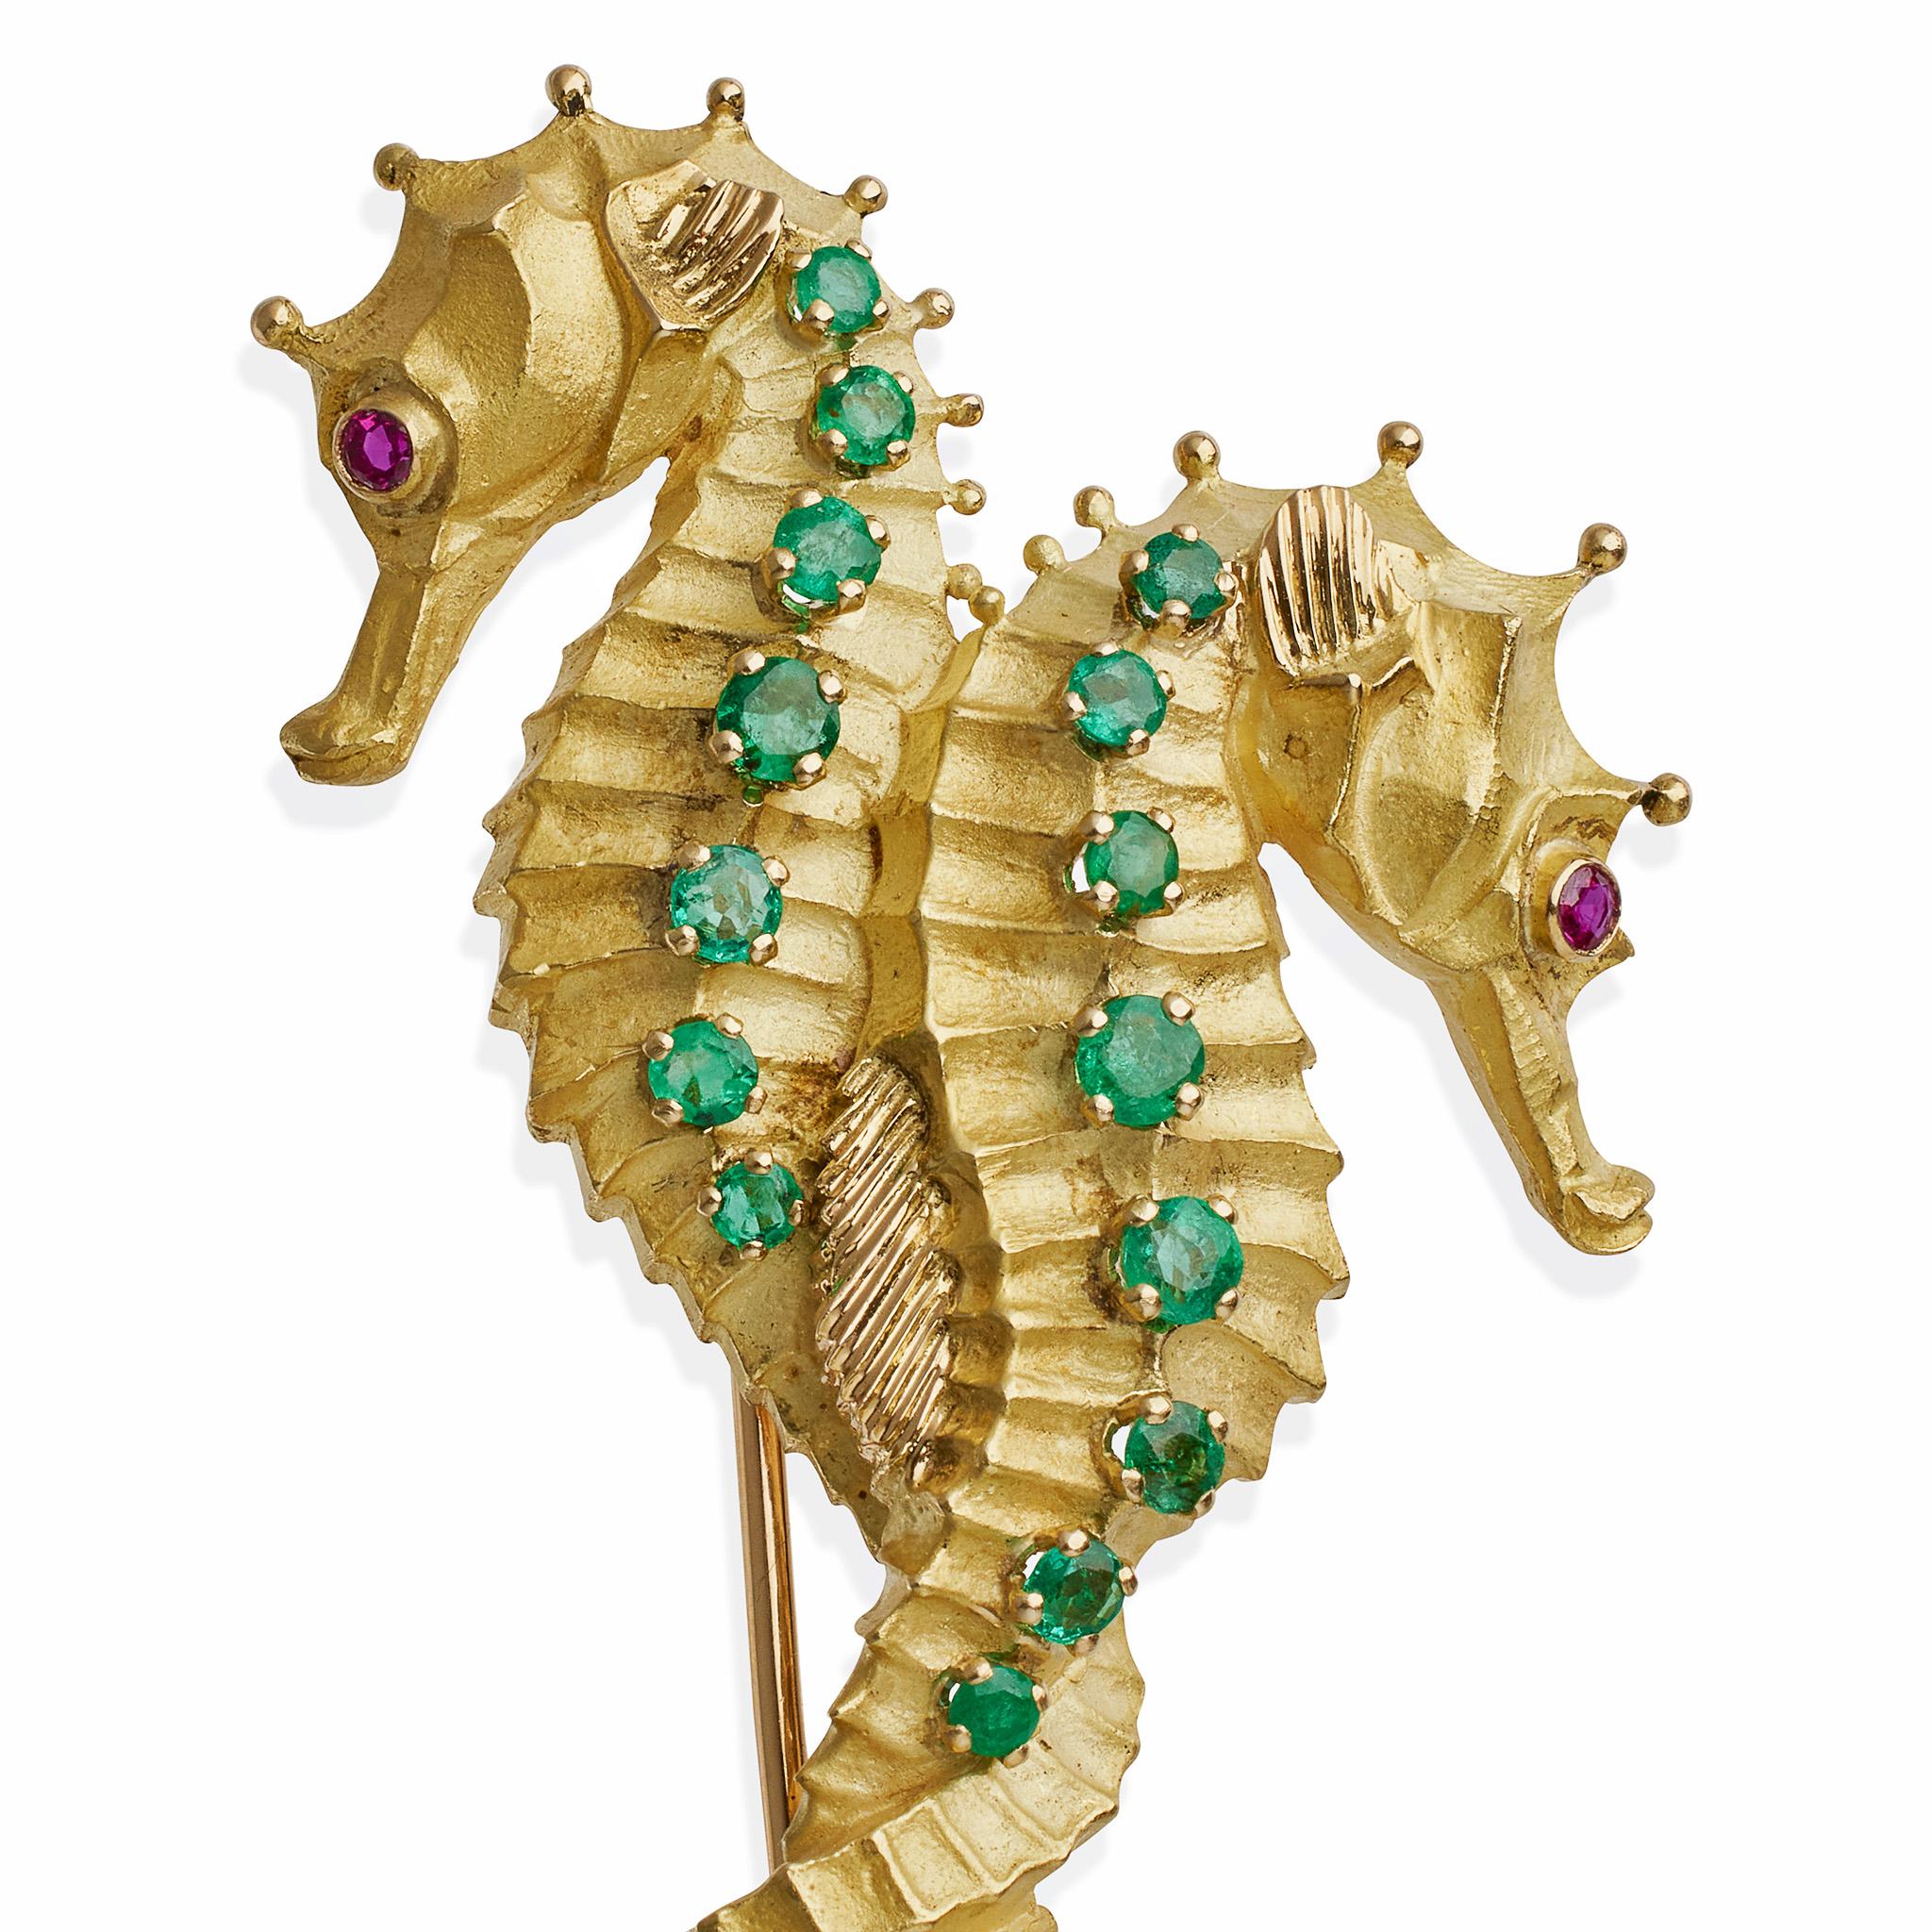 Created in Paris for Tiffany & Co. by Geroges Lenfant's firm in the 1960s-1970s, this double seahorse clip brooch is composed of 18K gold, emeralds and rubies. Designed as seahorses with entwined tails, their bodies set with graduating lines of